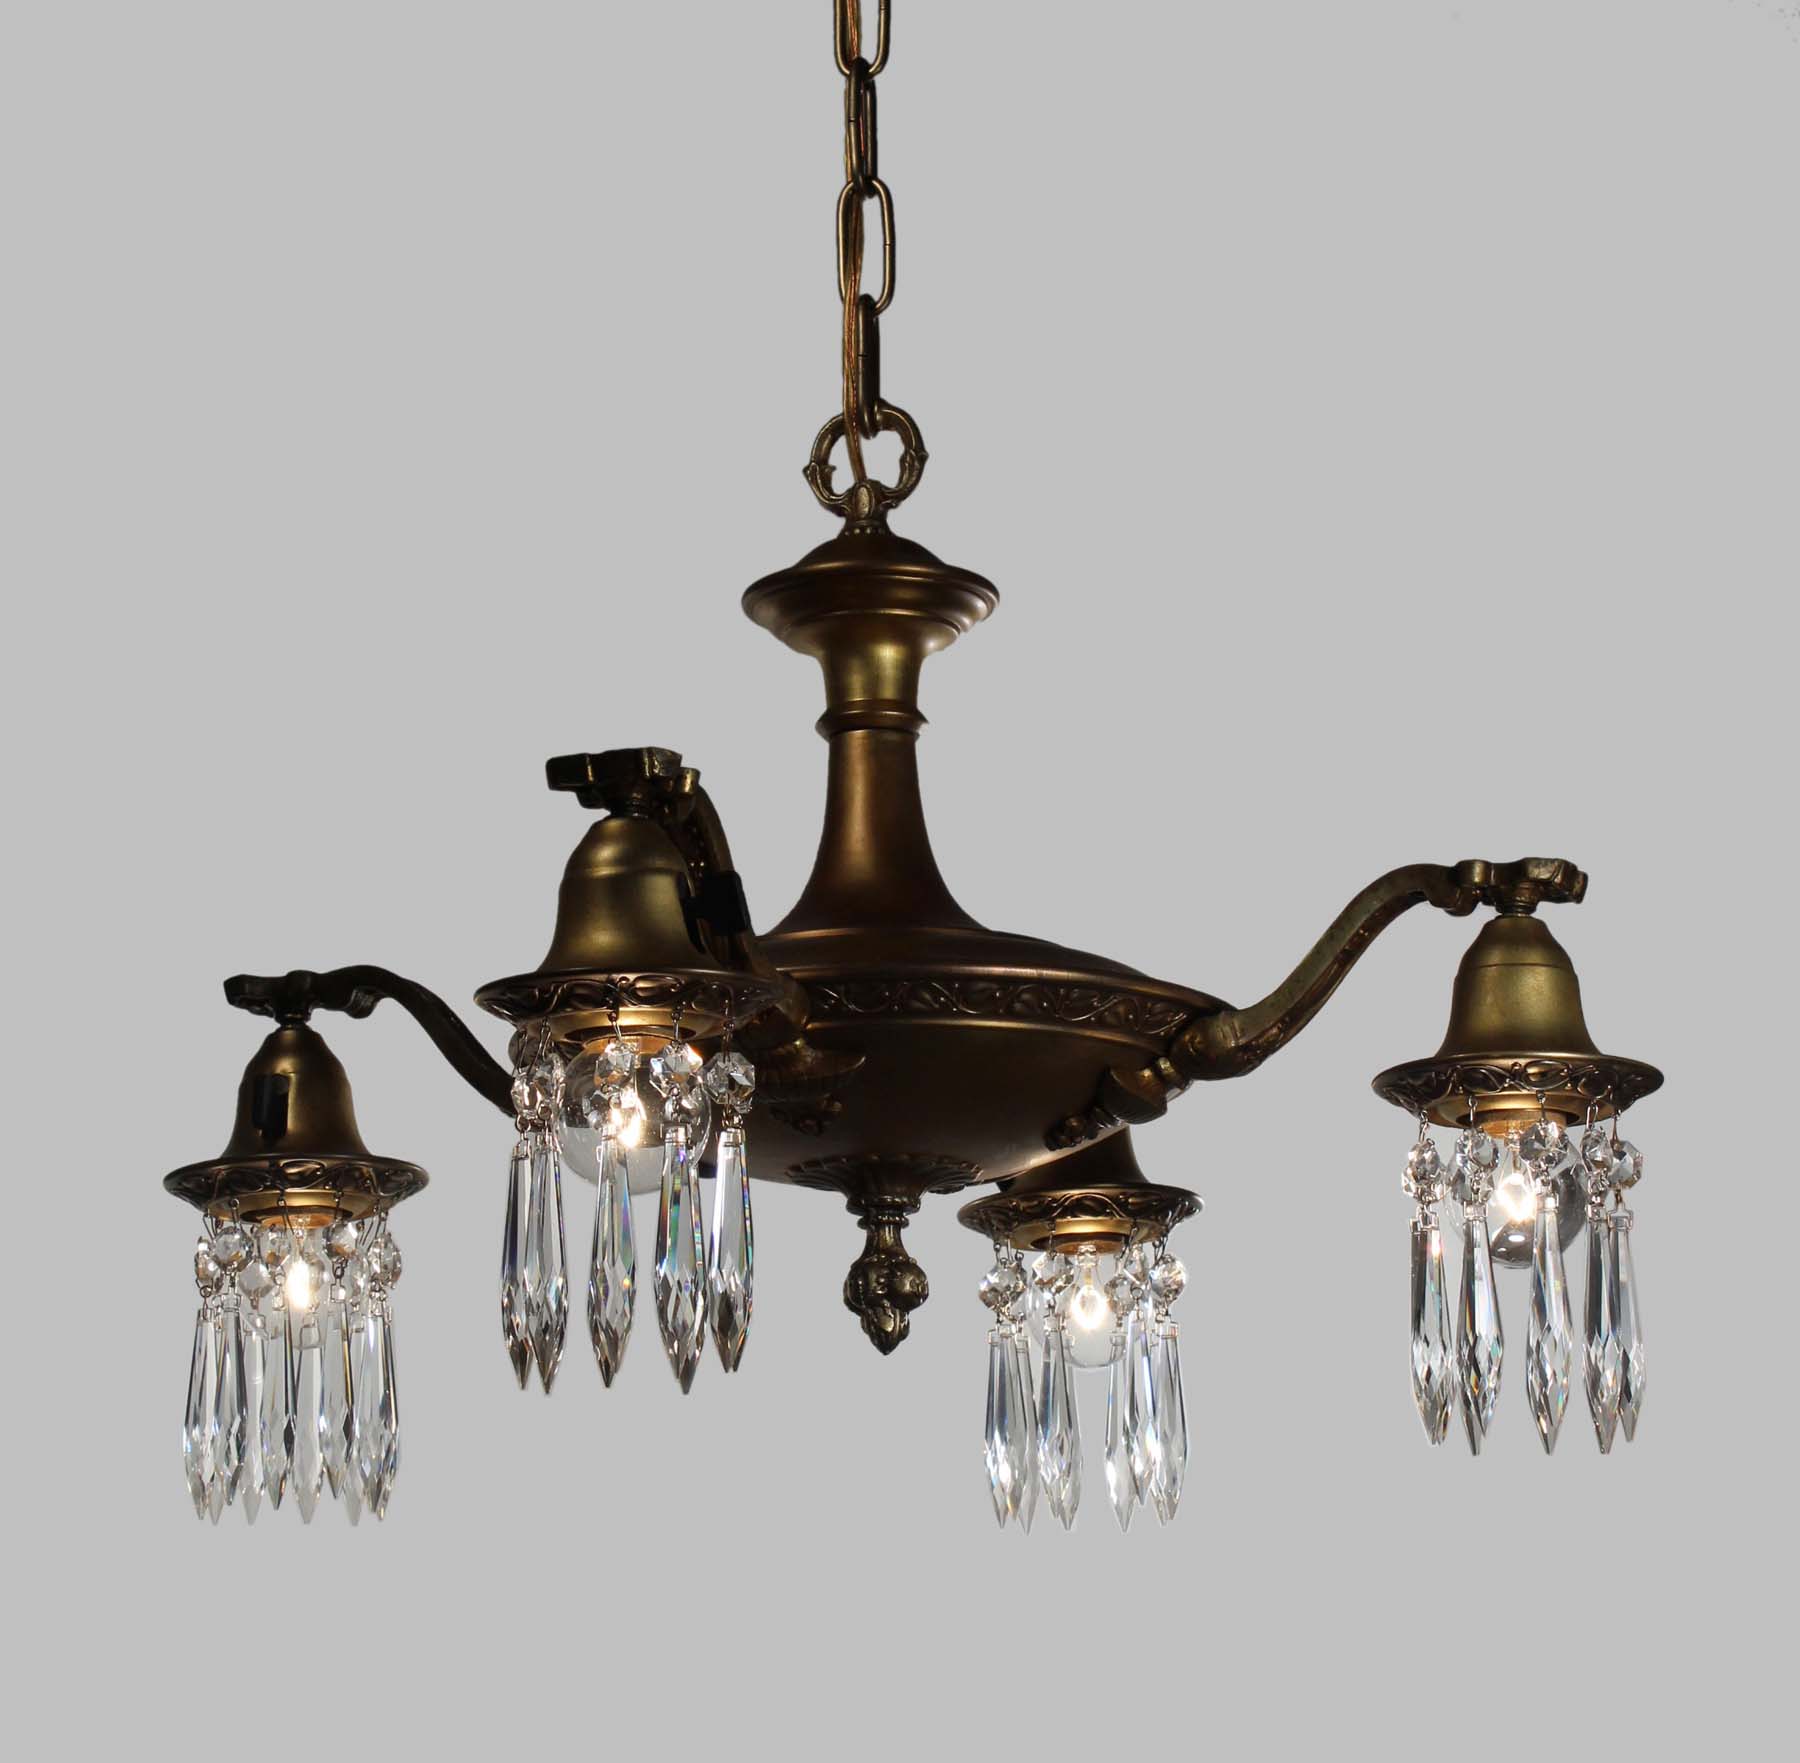 SOLD Antique Brass Four-Light Chandelier with Prisms-68431